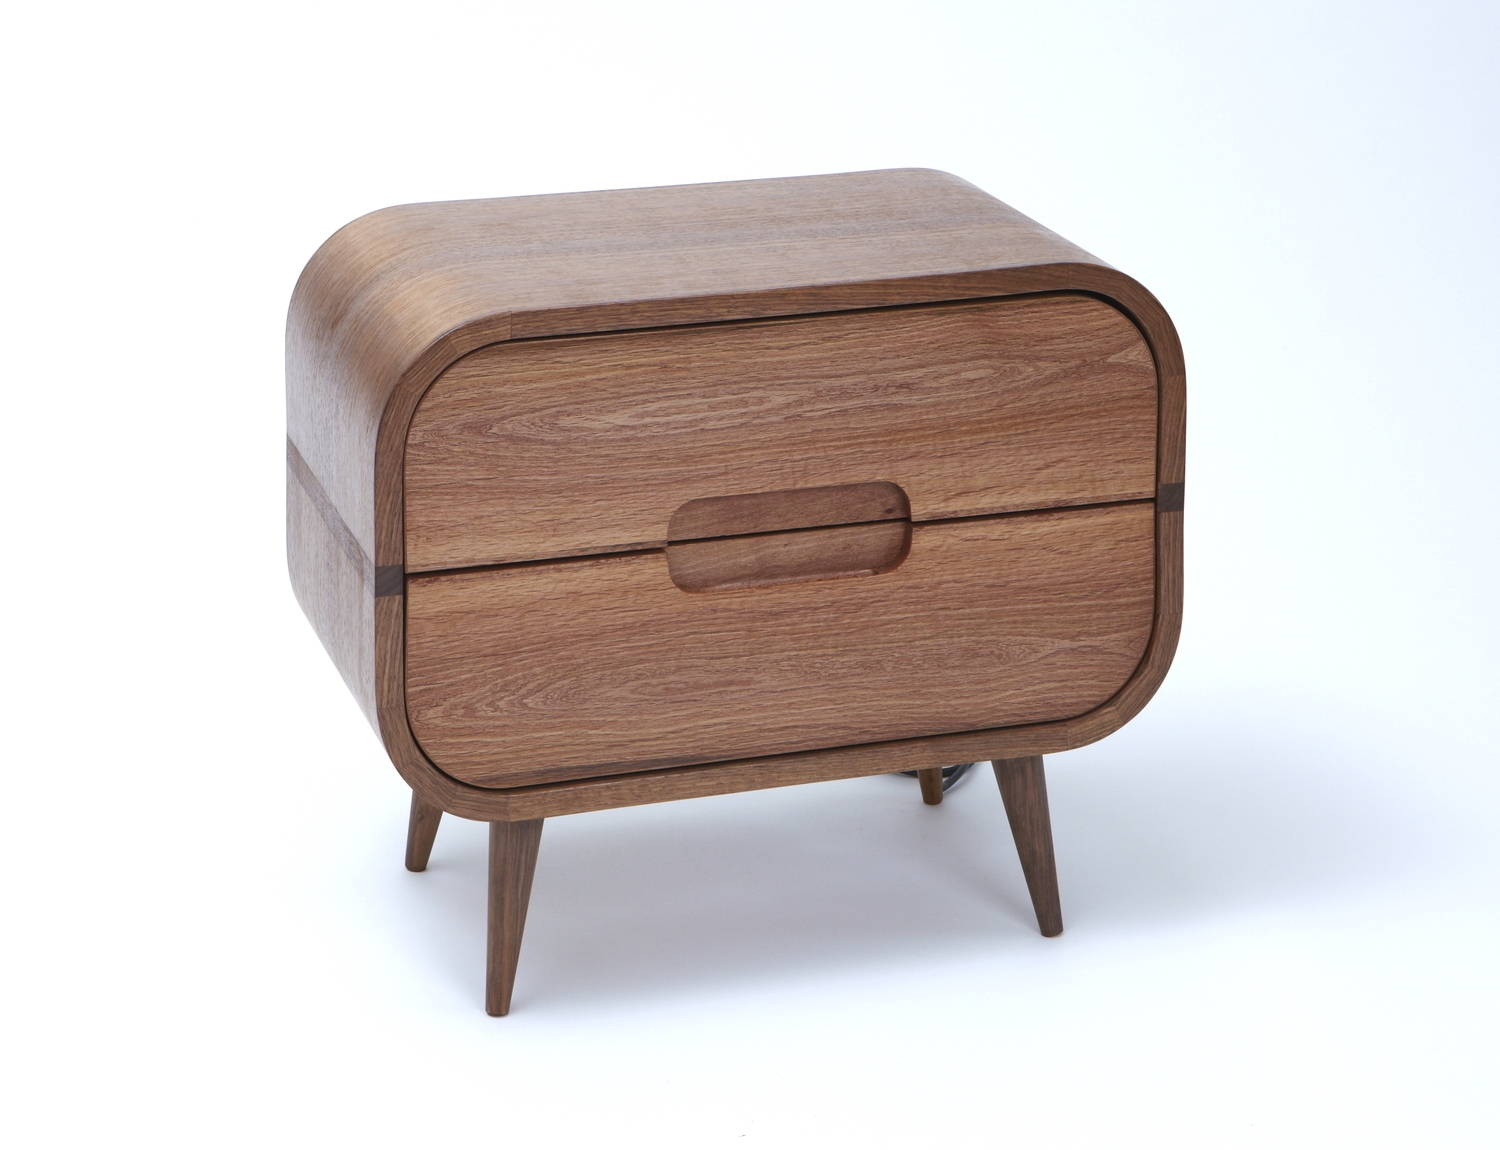 1950's inspired bedside cabinet made by Angus.